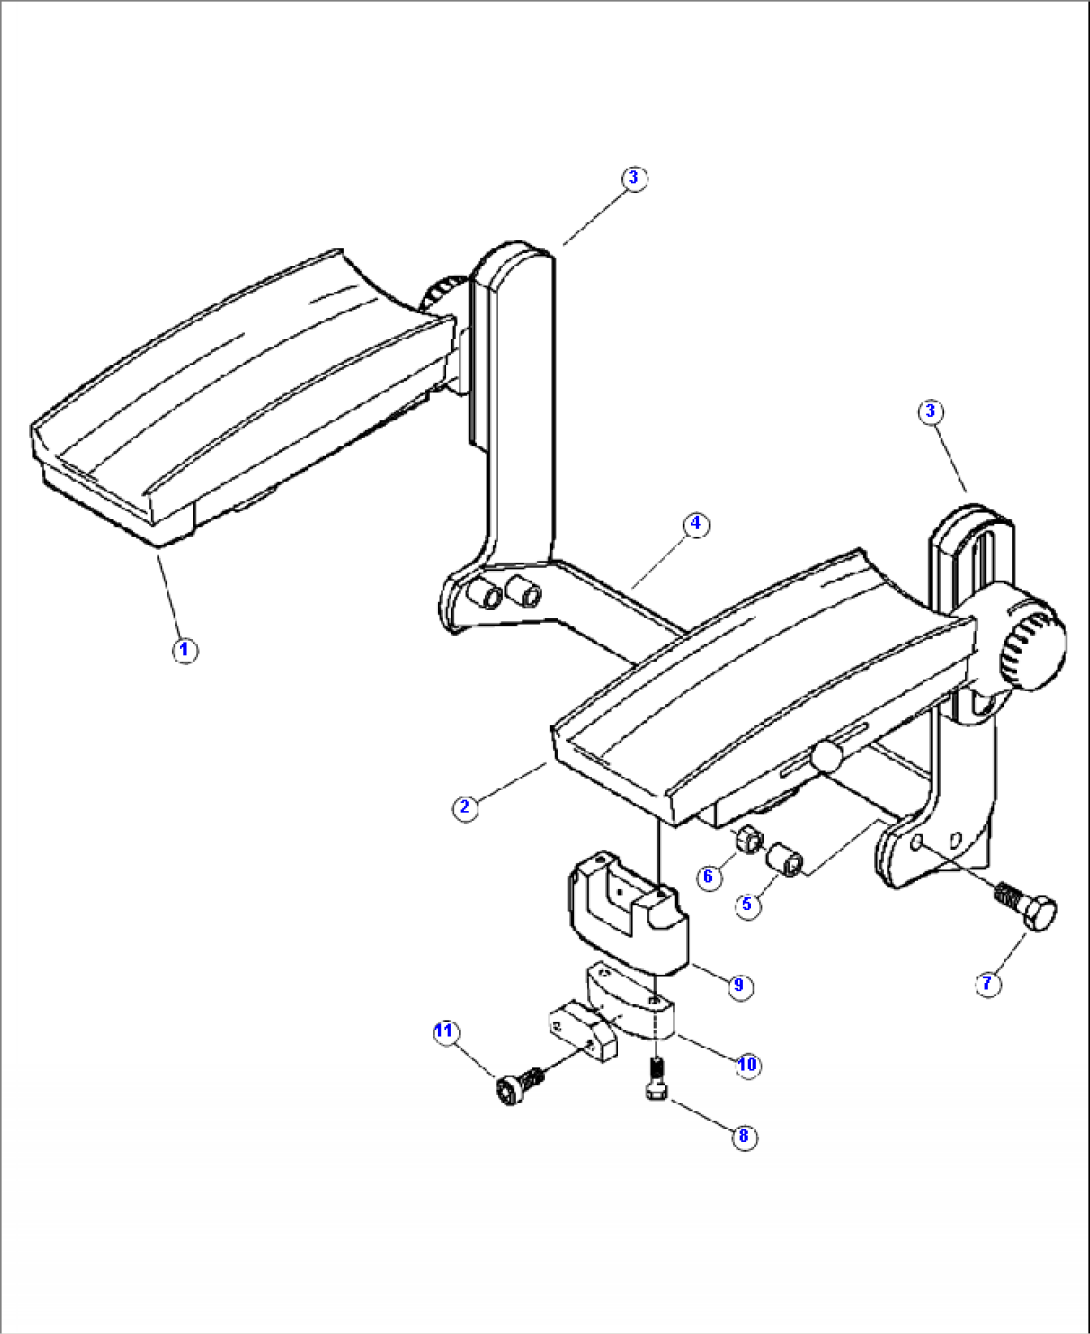 K0130-01A0 KAB OPERATOR SEAT ARM REST